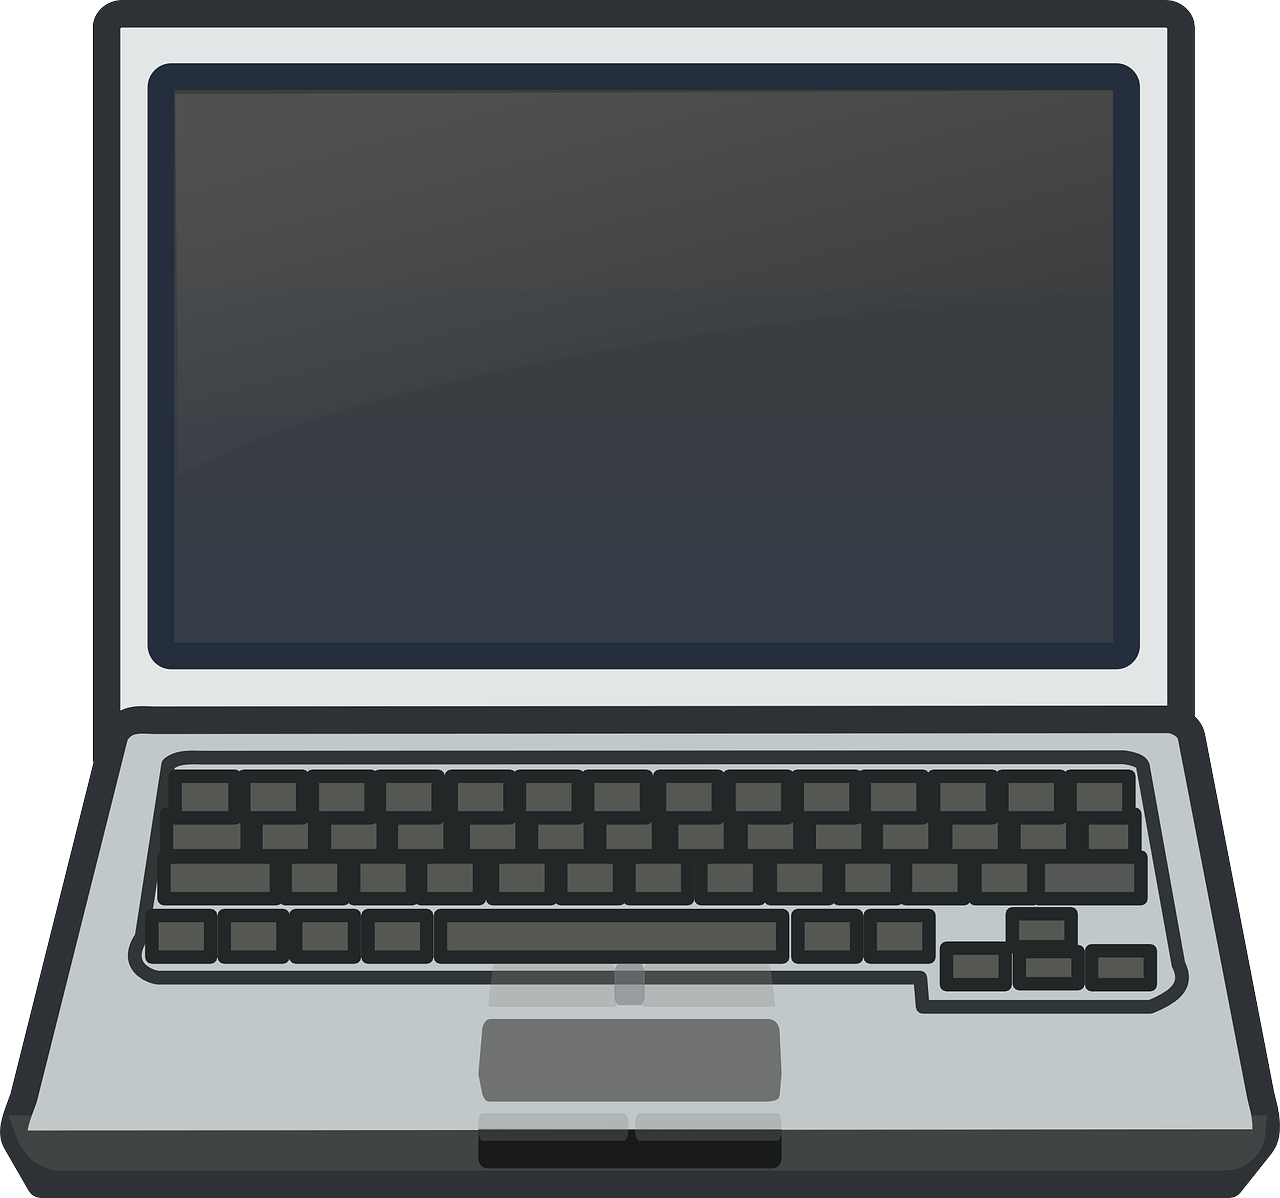 Laptop free to use clip art